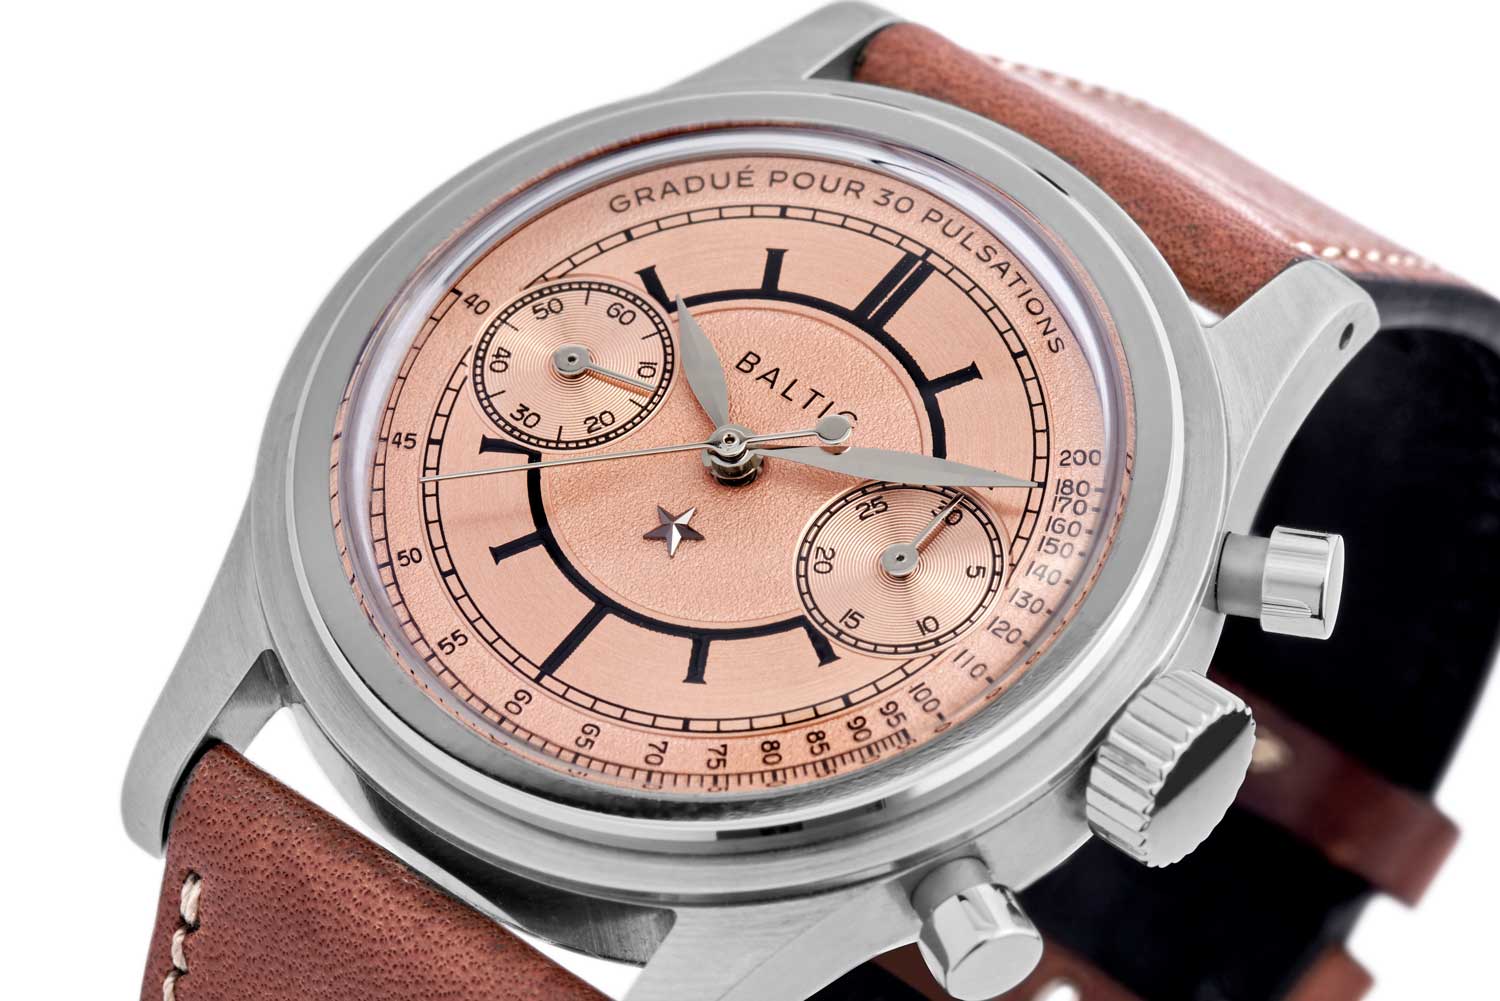 The Baltic Bicompax Pulso for Revolution & The Rake is a limited edition of 250 pieces that is now sold out (© Revolution)